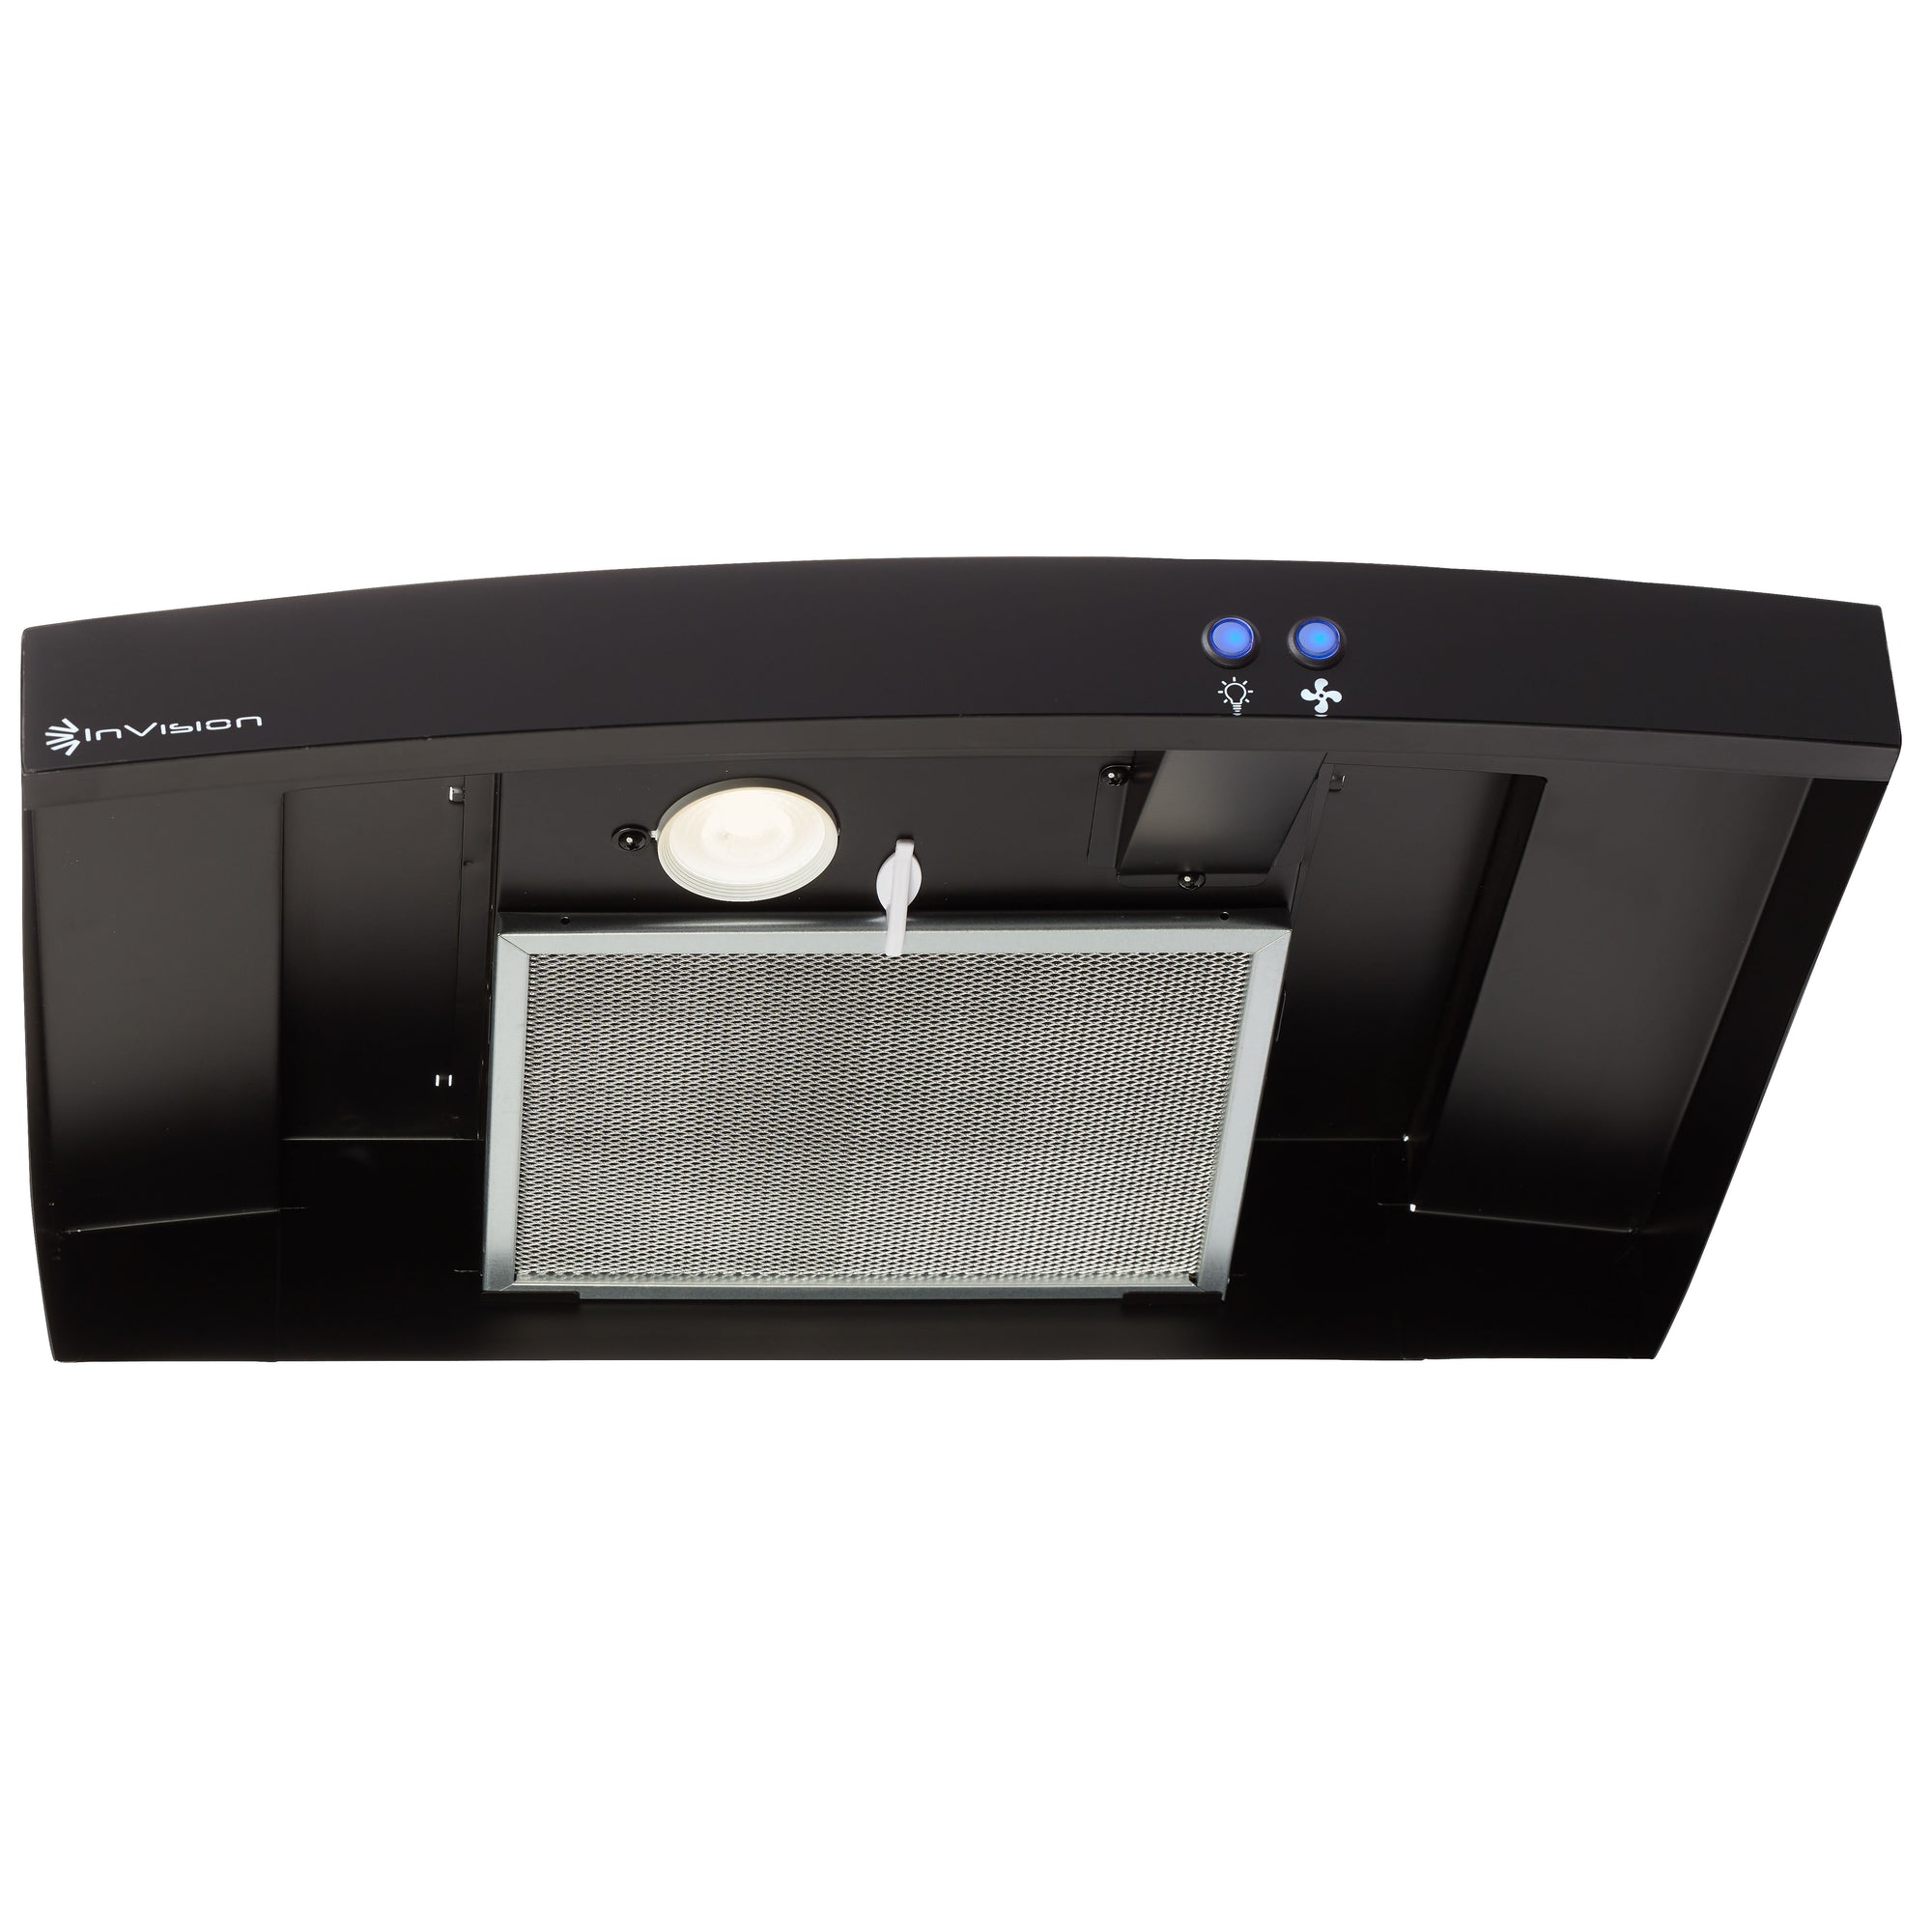 Invision by Dicor 280-2100 Vented Range Hood - Black